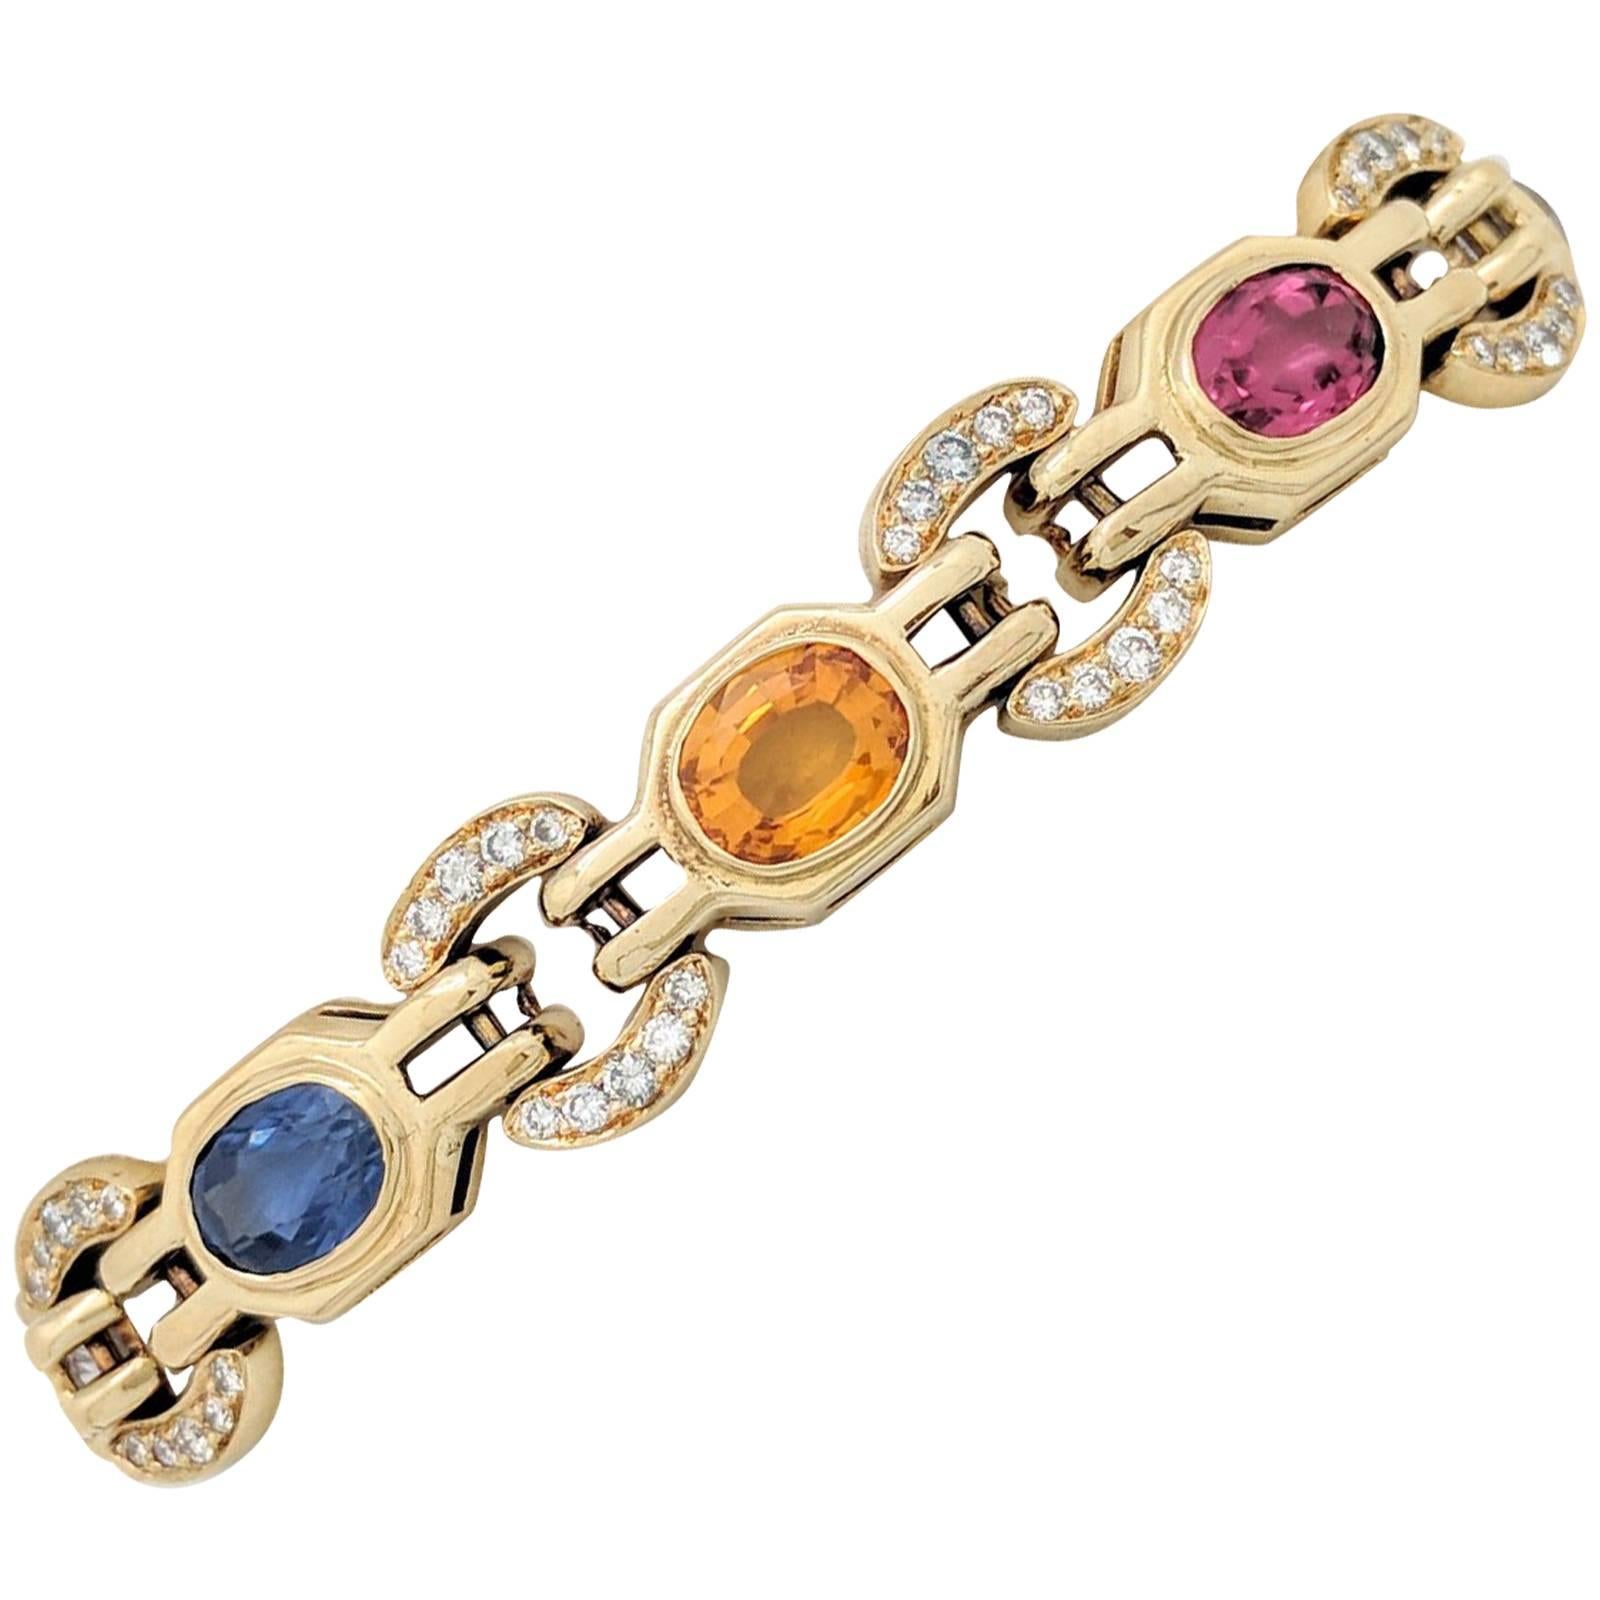 Ladies 18k Yellow Gold Multi-Colored Sapphire and Diamond Bracelet 31.2 Grams For Sale